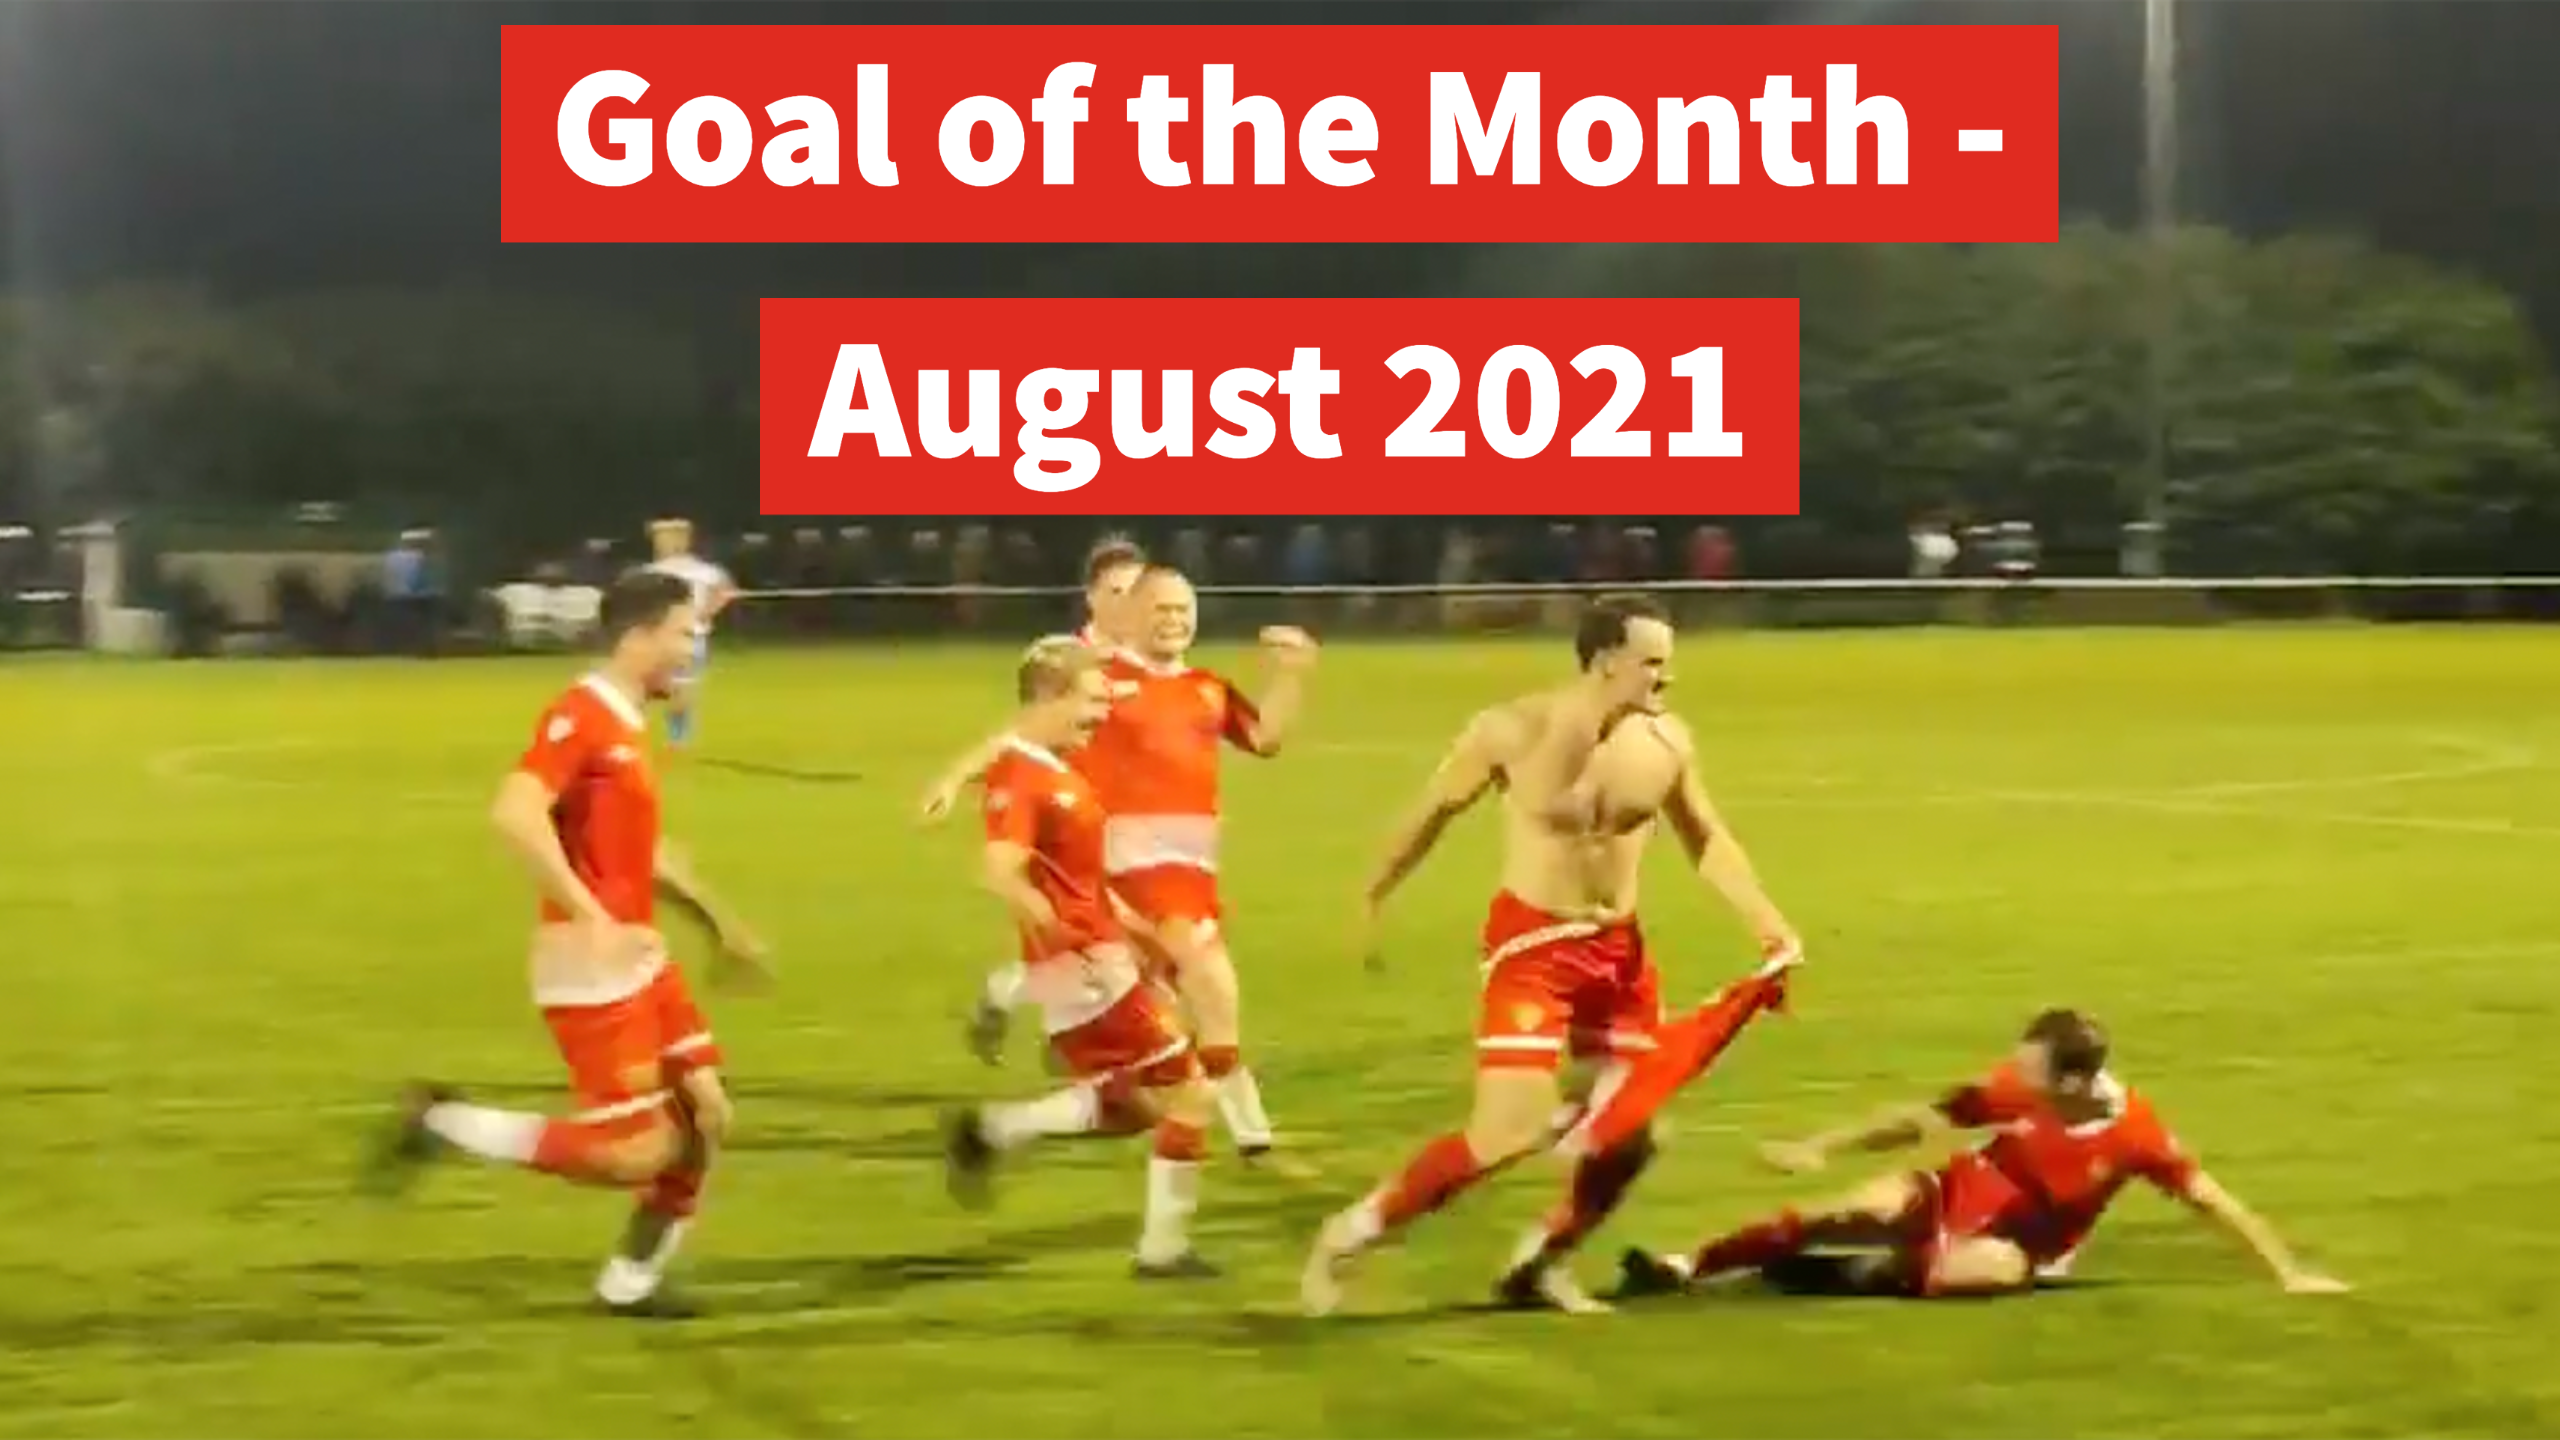 Goal of the Month - August 2021